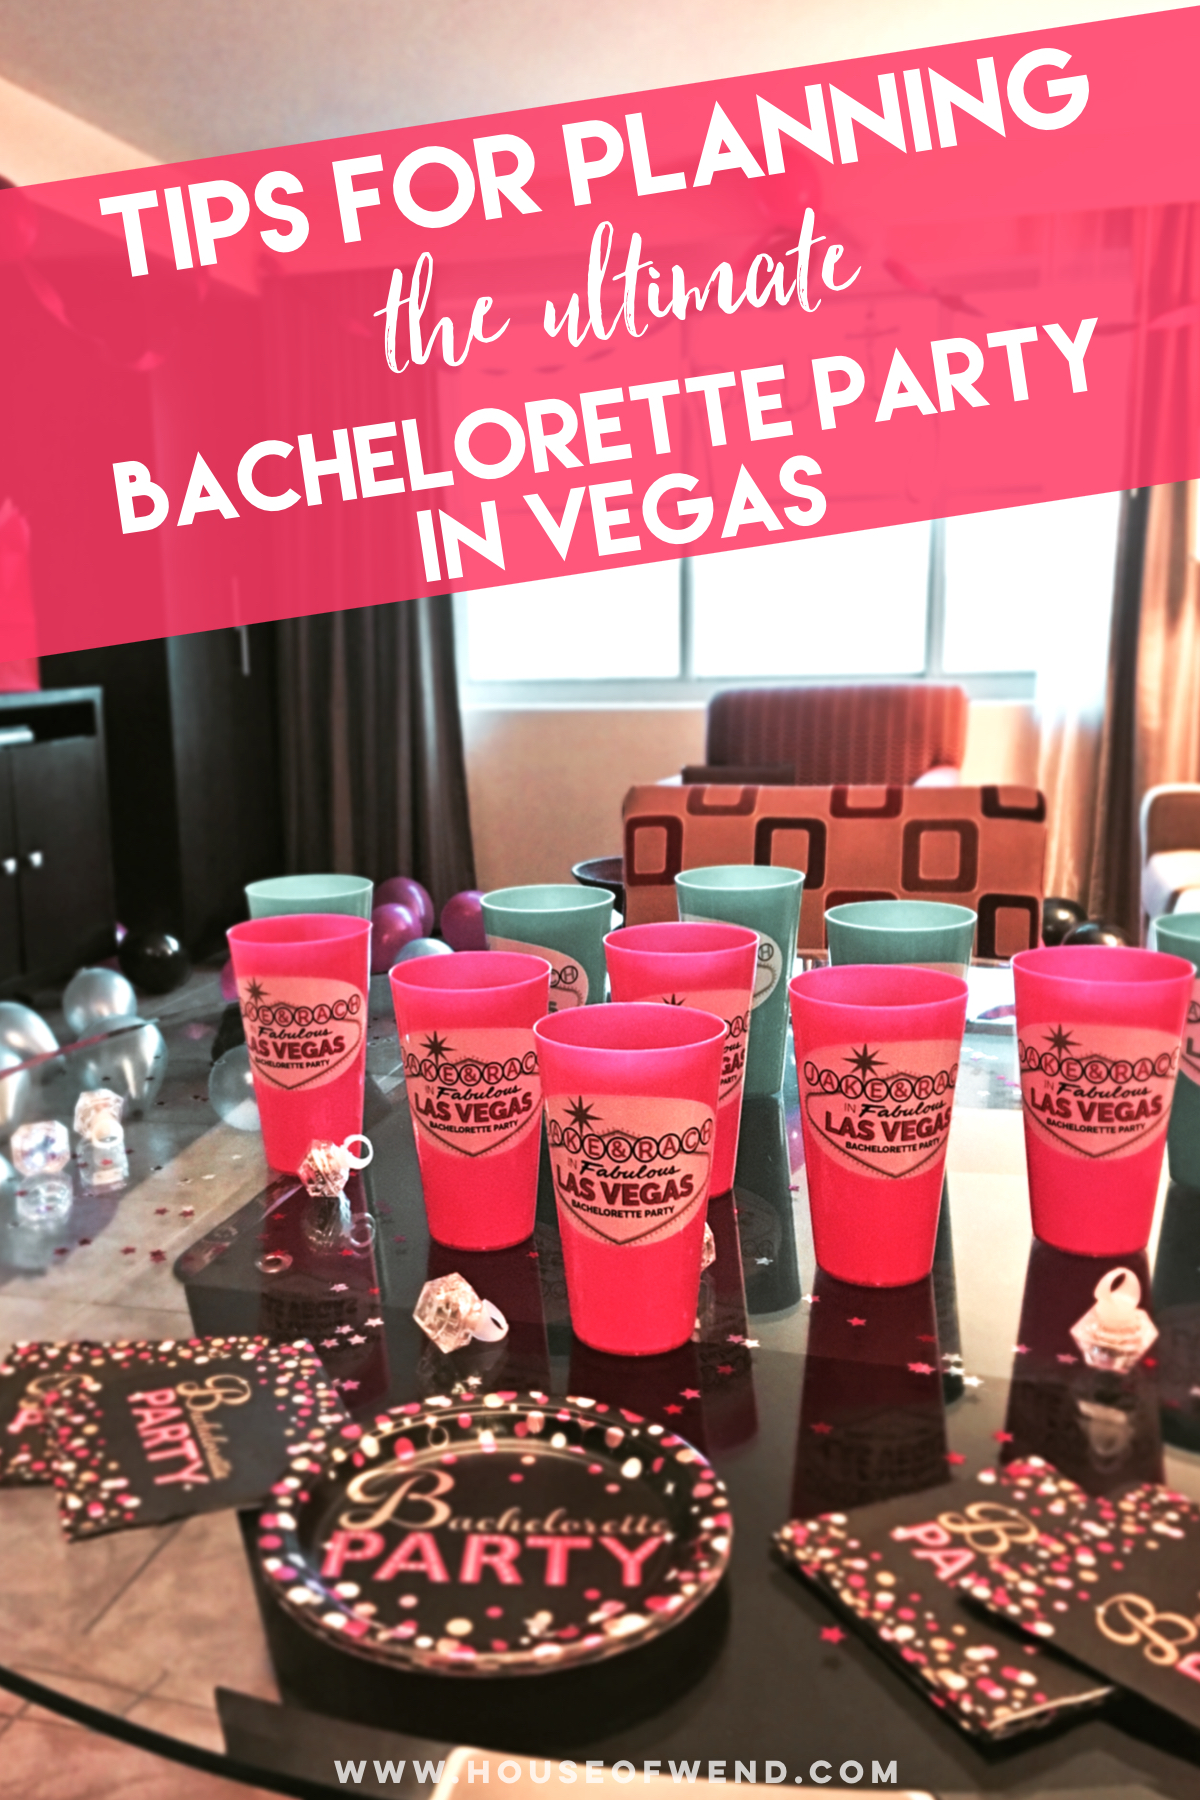 Tips for planning the ultimate bachelorette party in Vegas